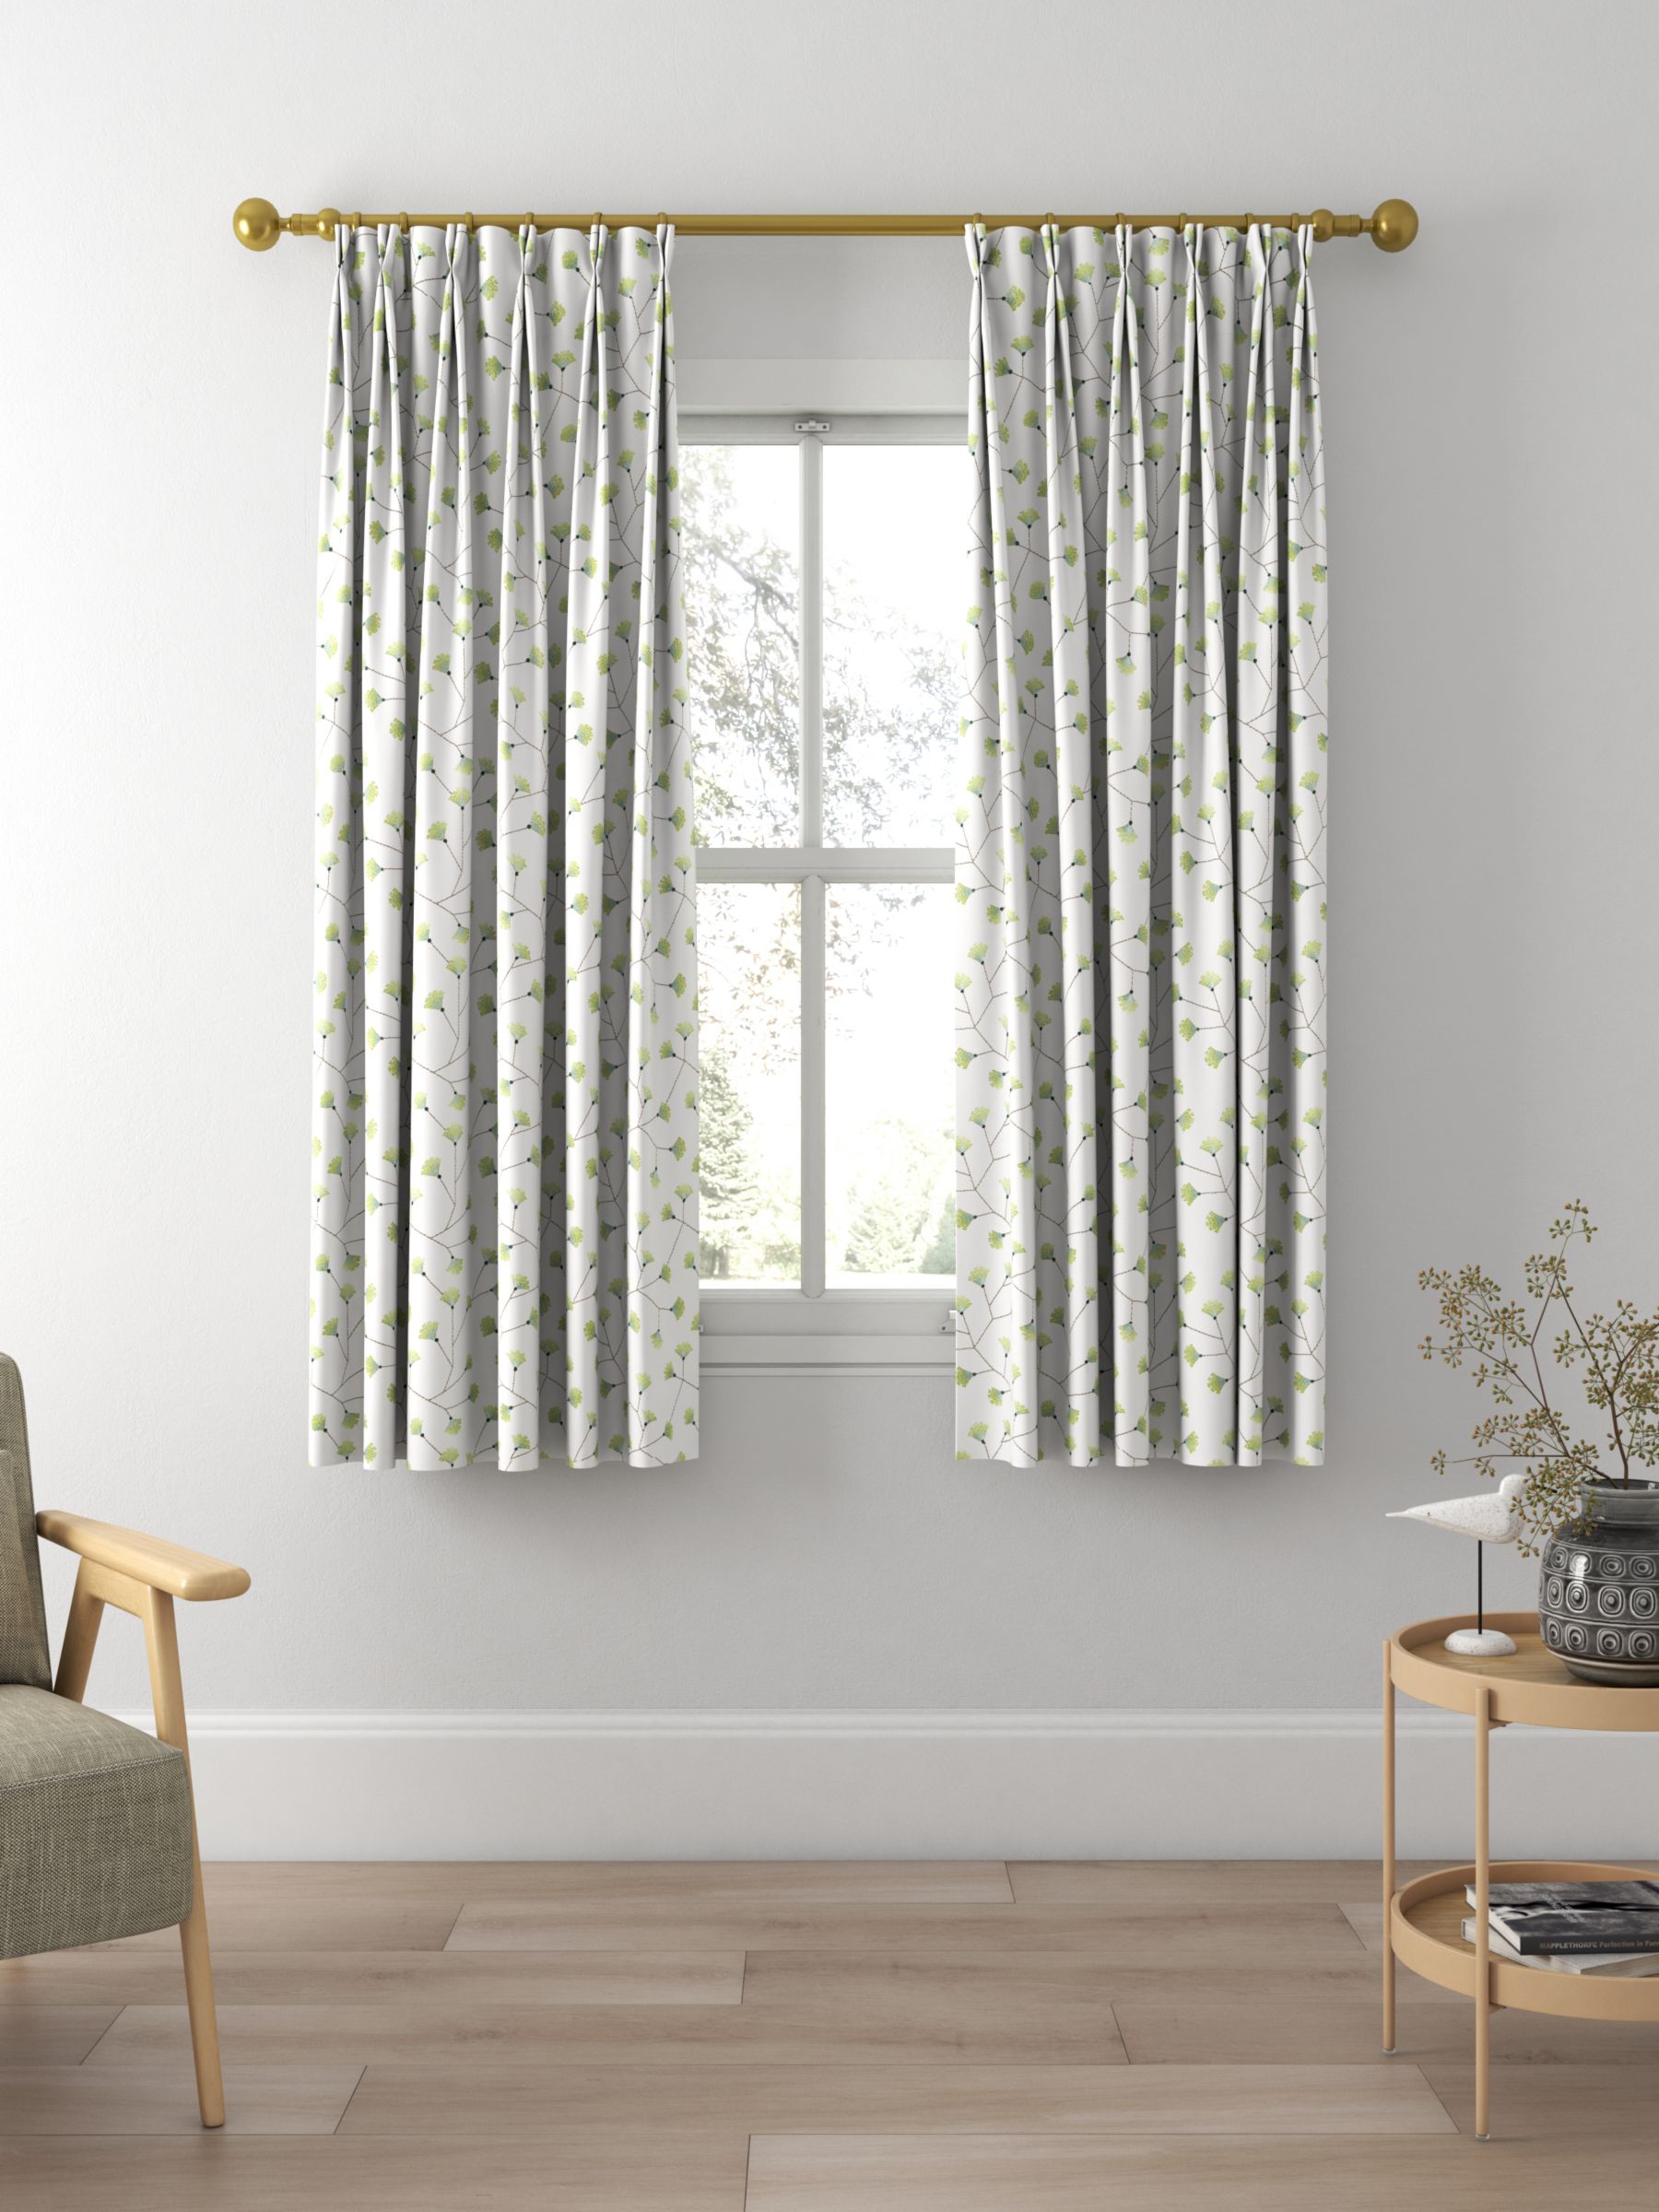 Sanderson Gingko Trail Made to Measure Curtains, Winter Rocket